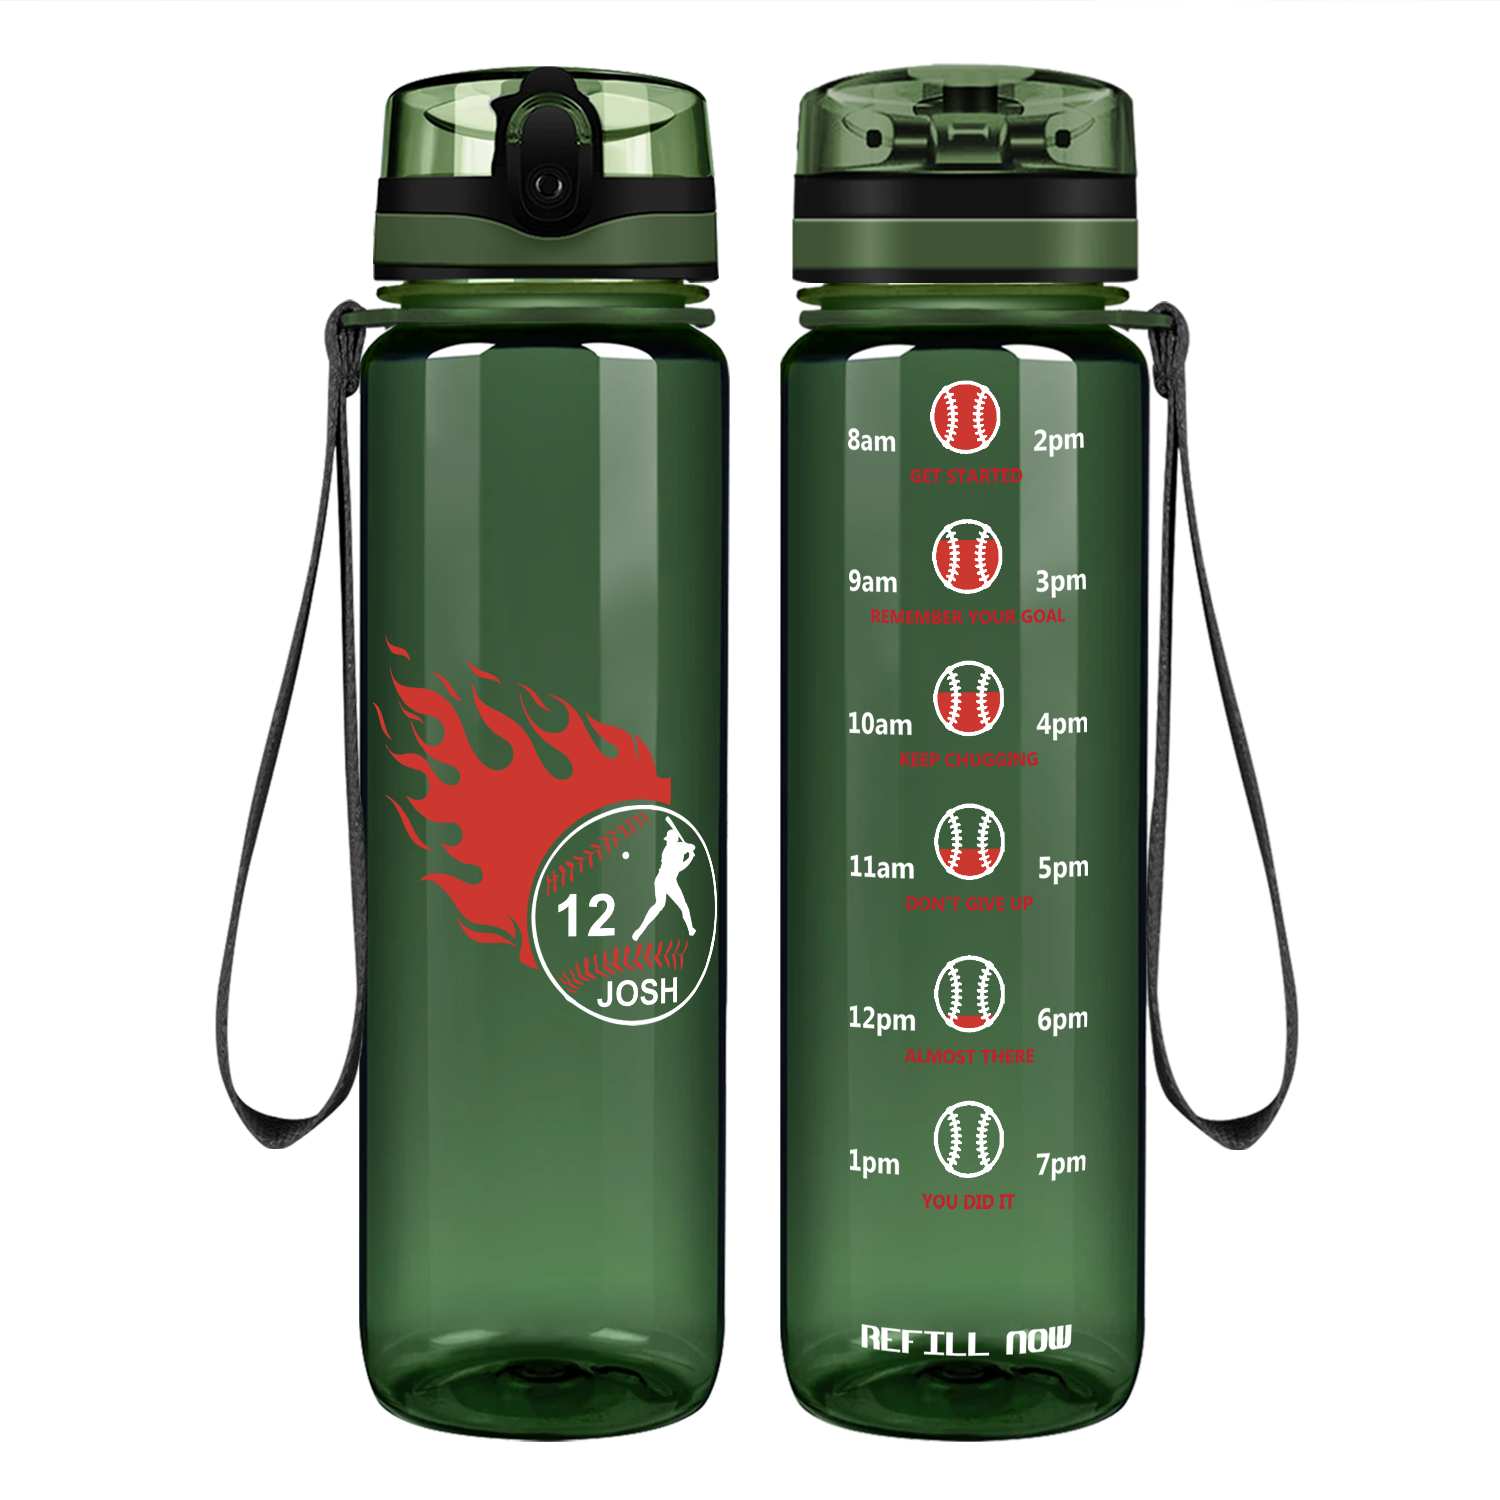 Personalized Baseball Name and Number on 32 oz Motivational Tracking Water Bottle